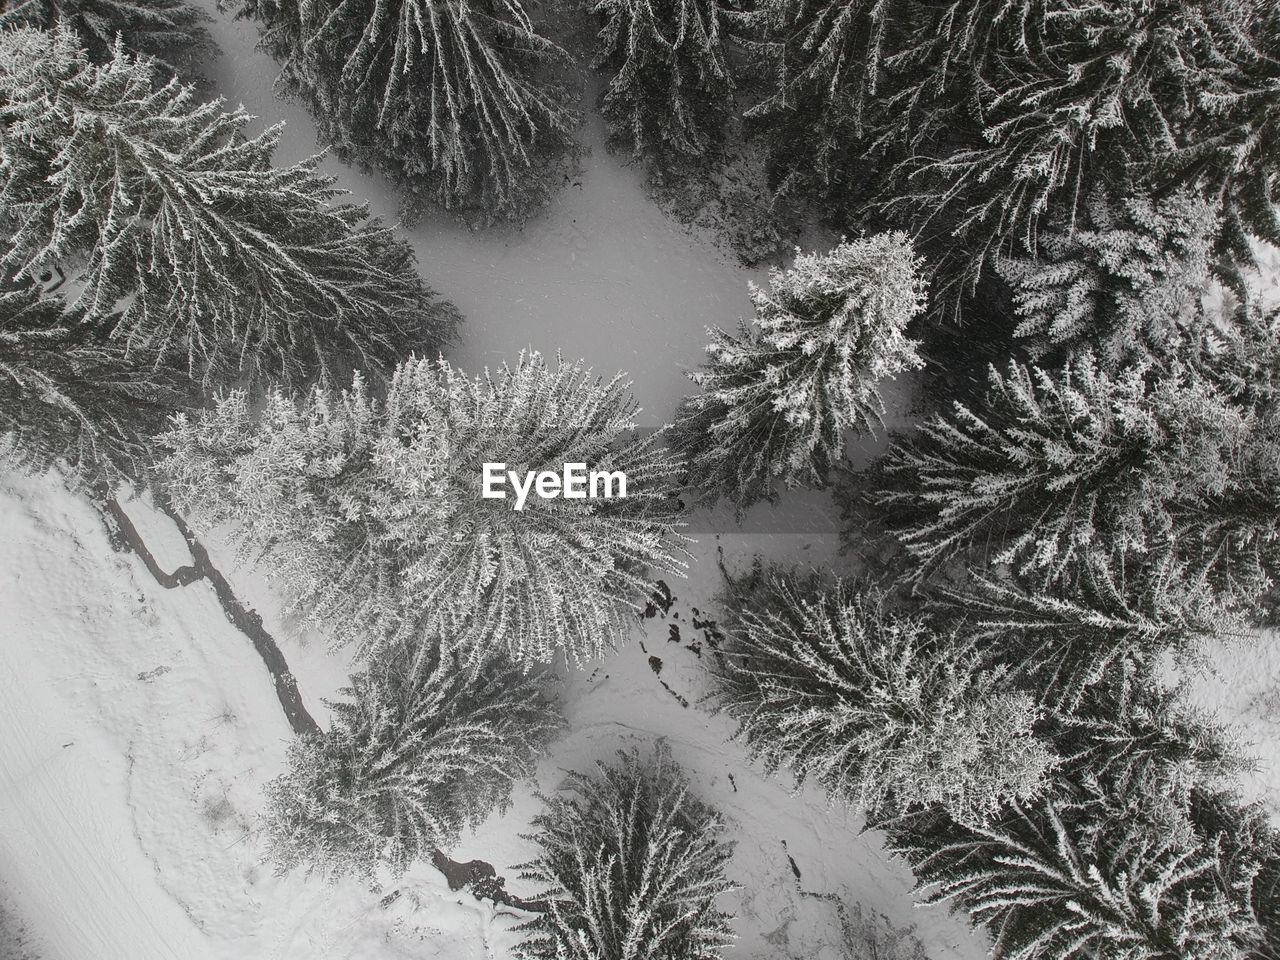 HIGH ANGLE VIEW OF FROZEN PINE TREES